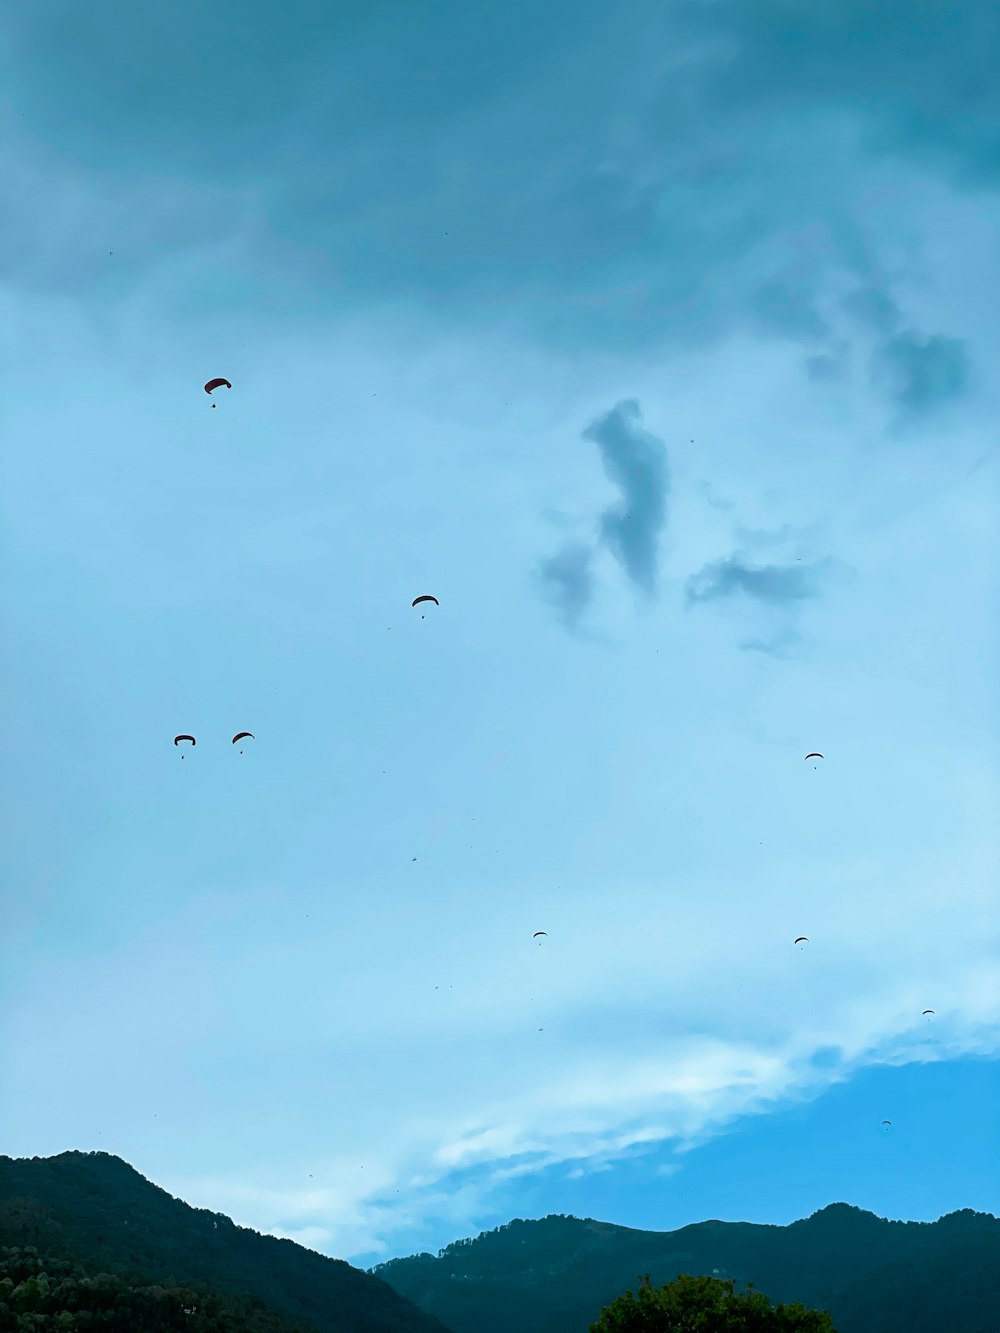 silhouette of birds flying under cloudy sky during daytime